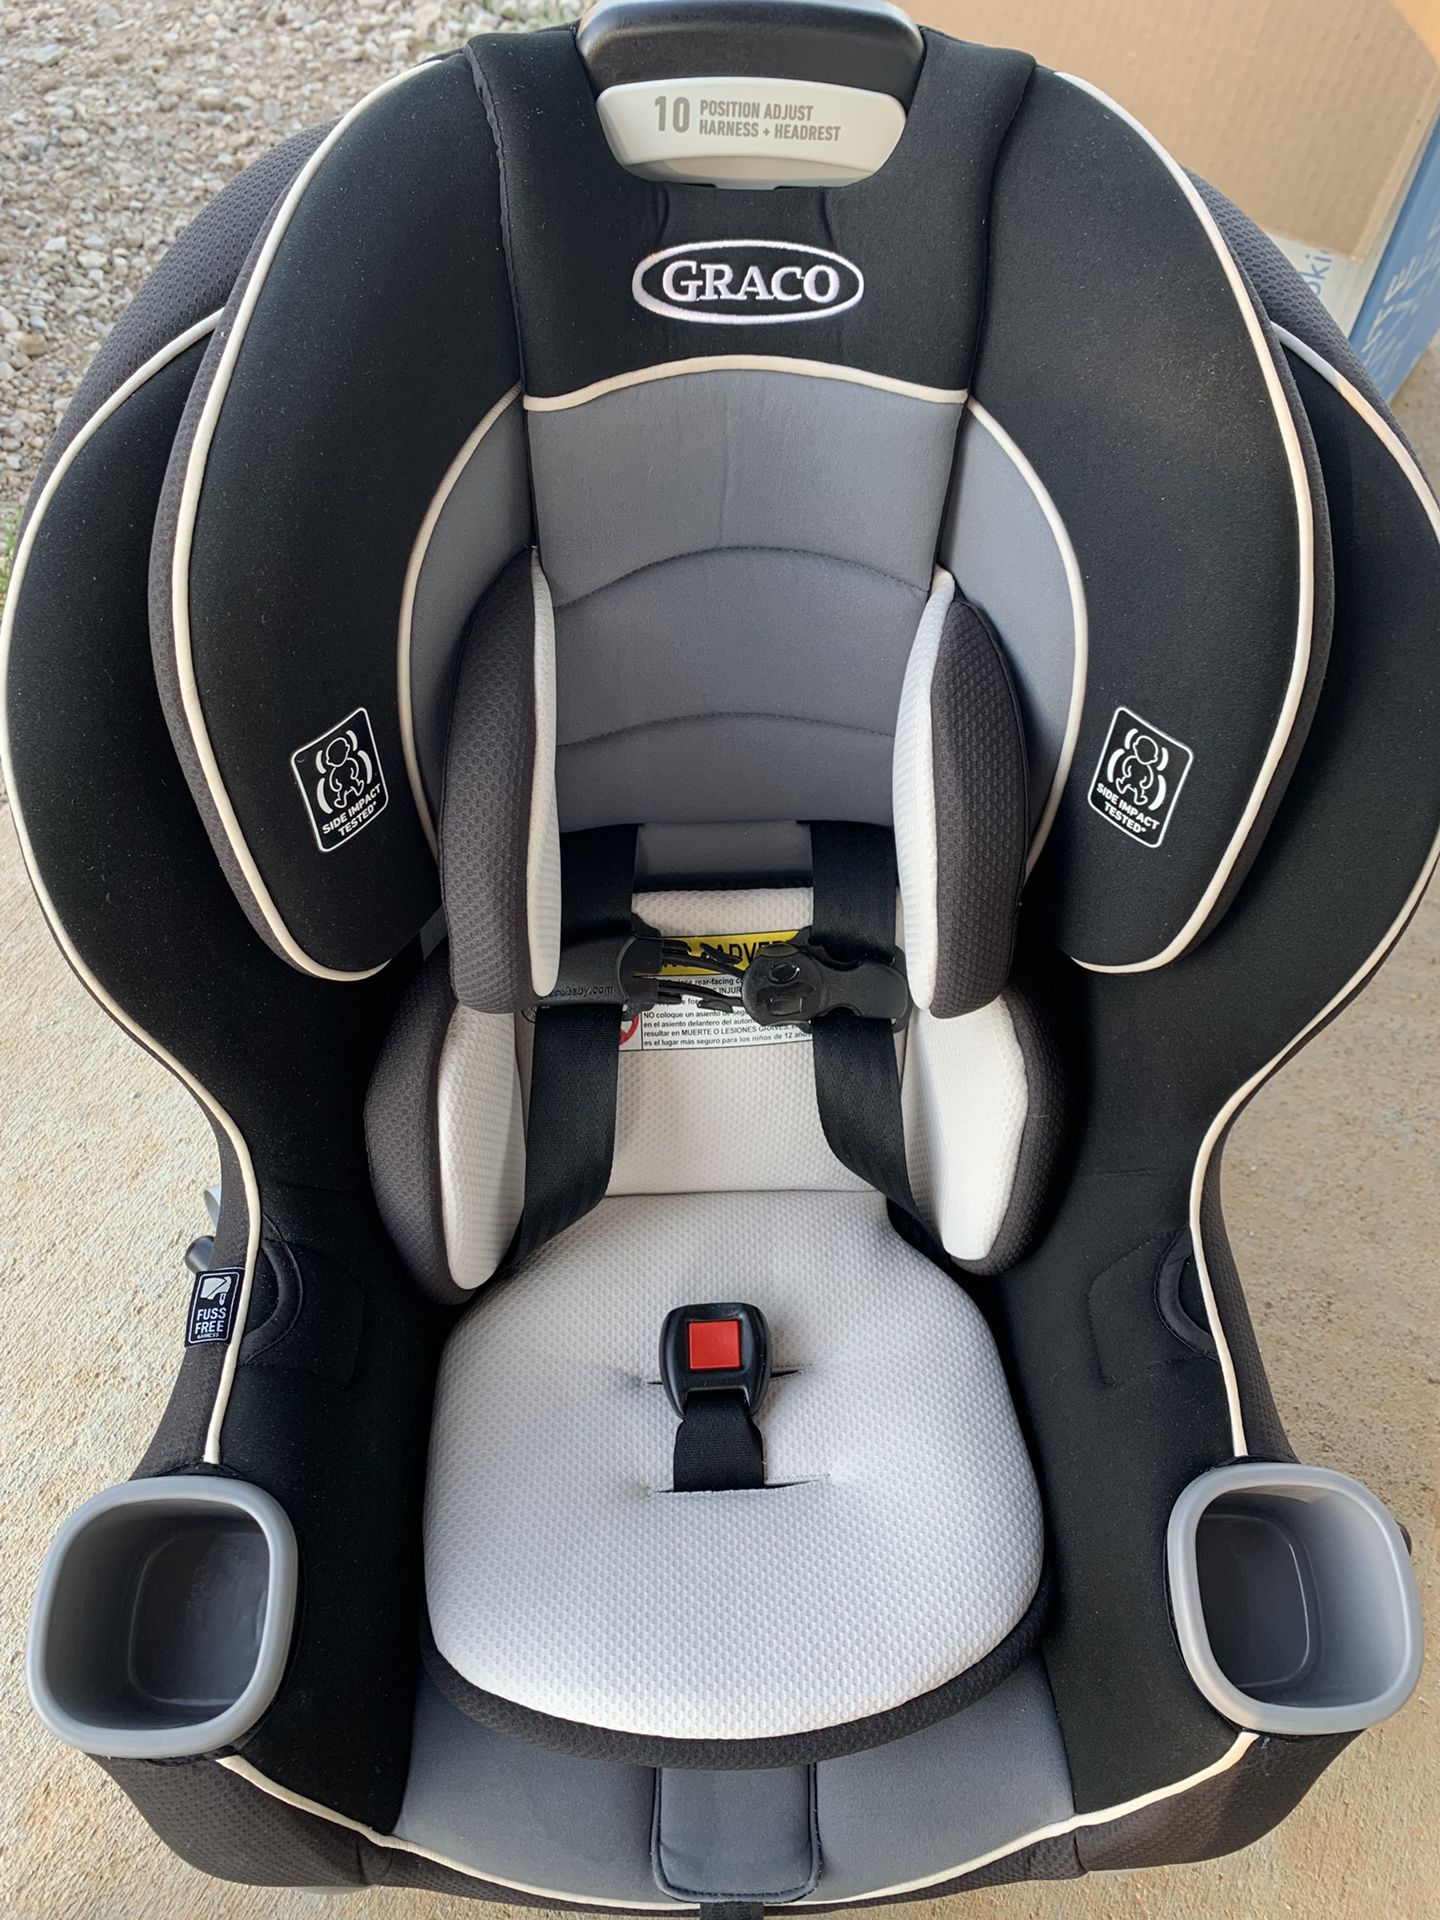 Graco Baby Extend2fit Convertible Car Seat